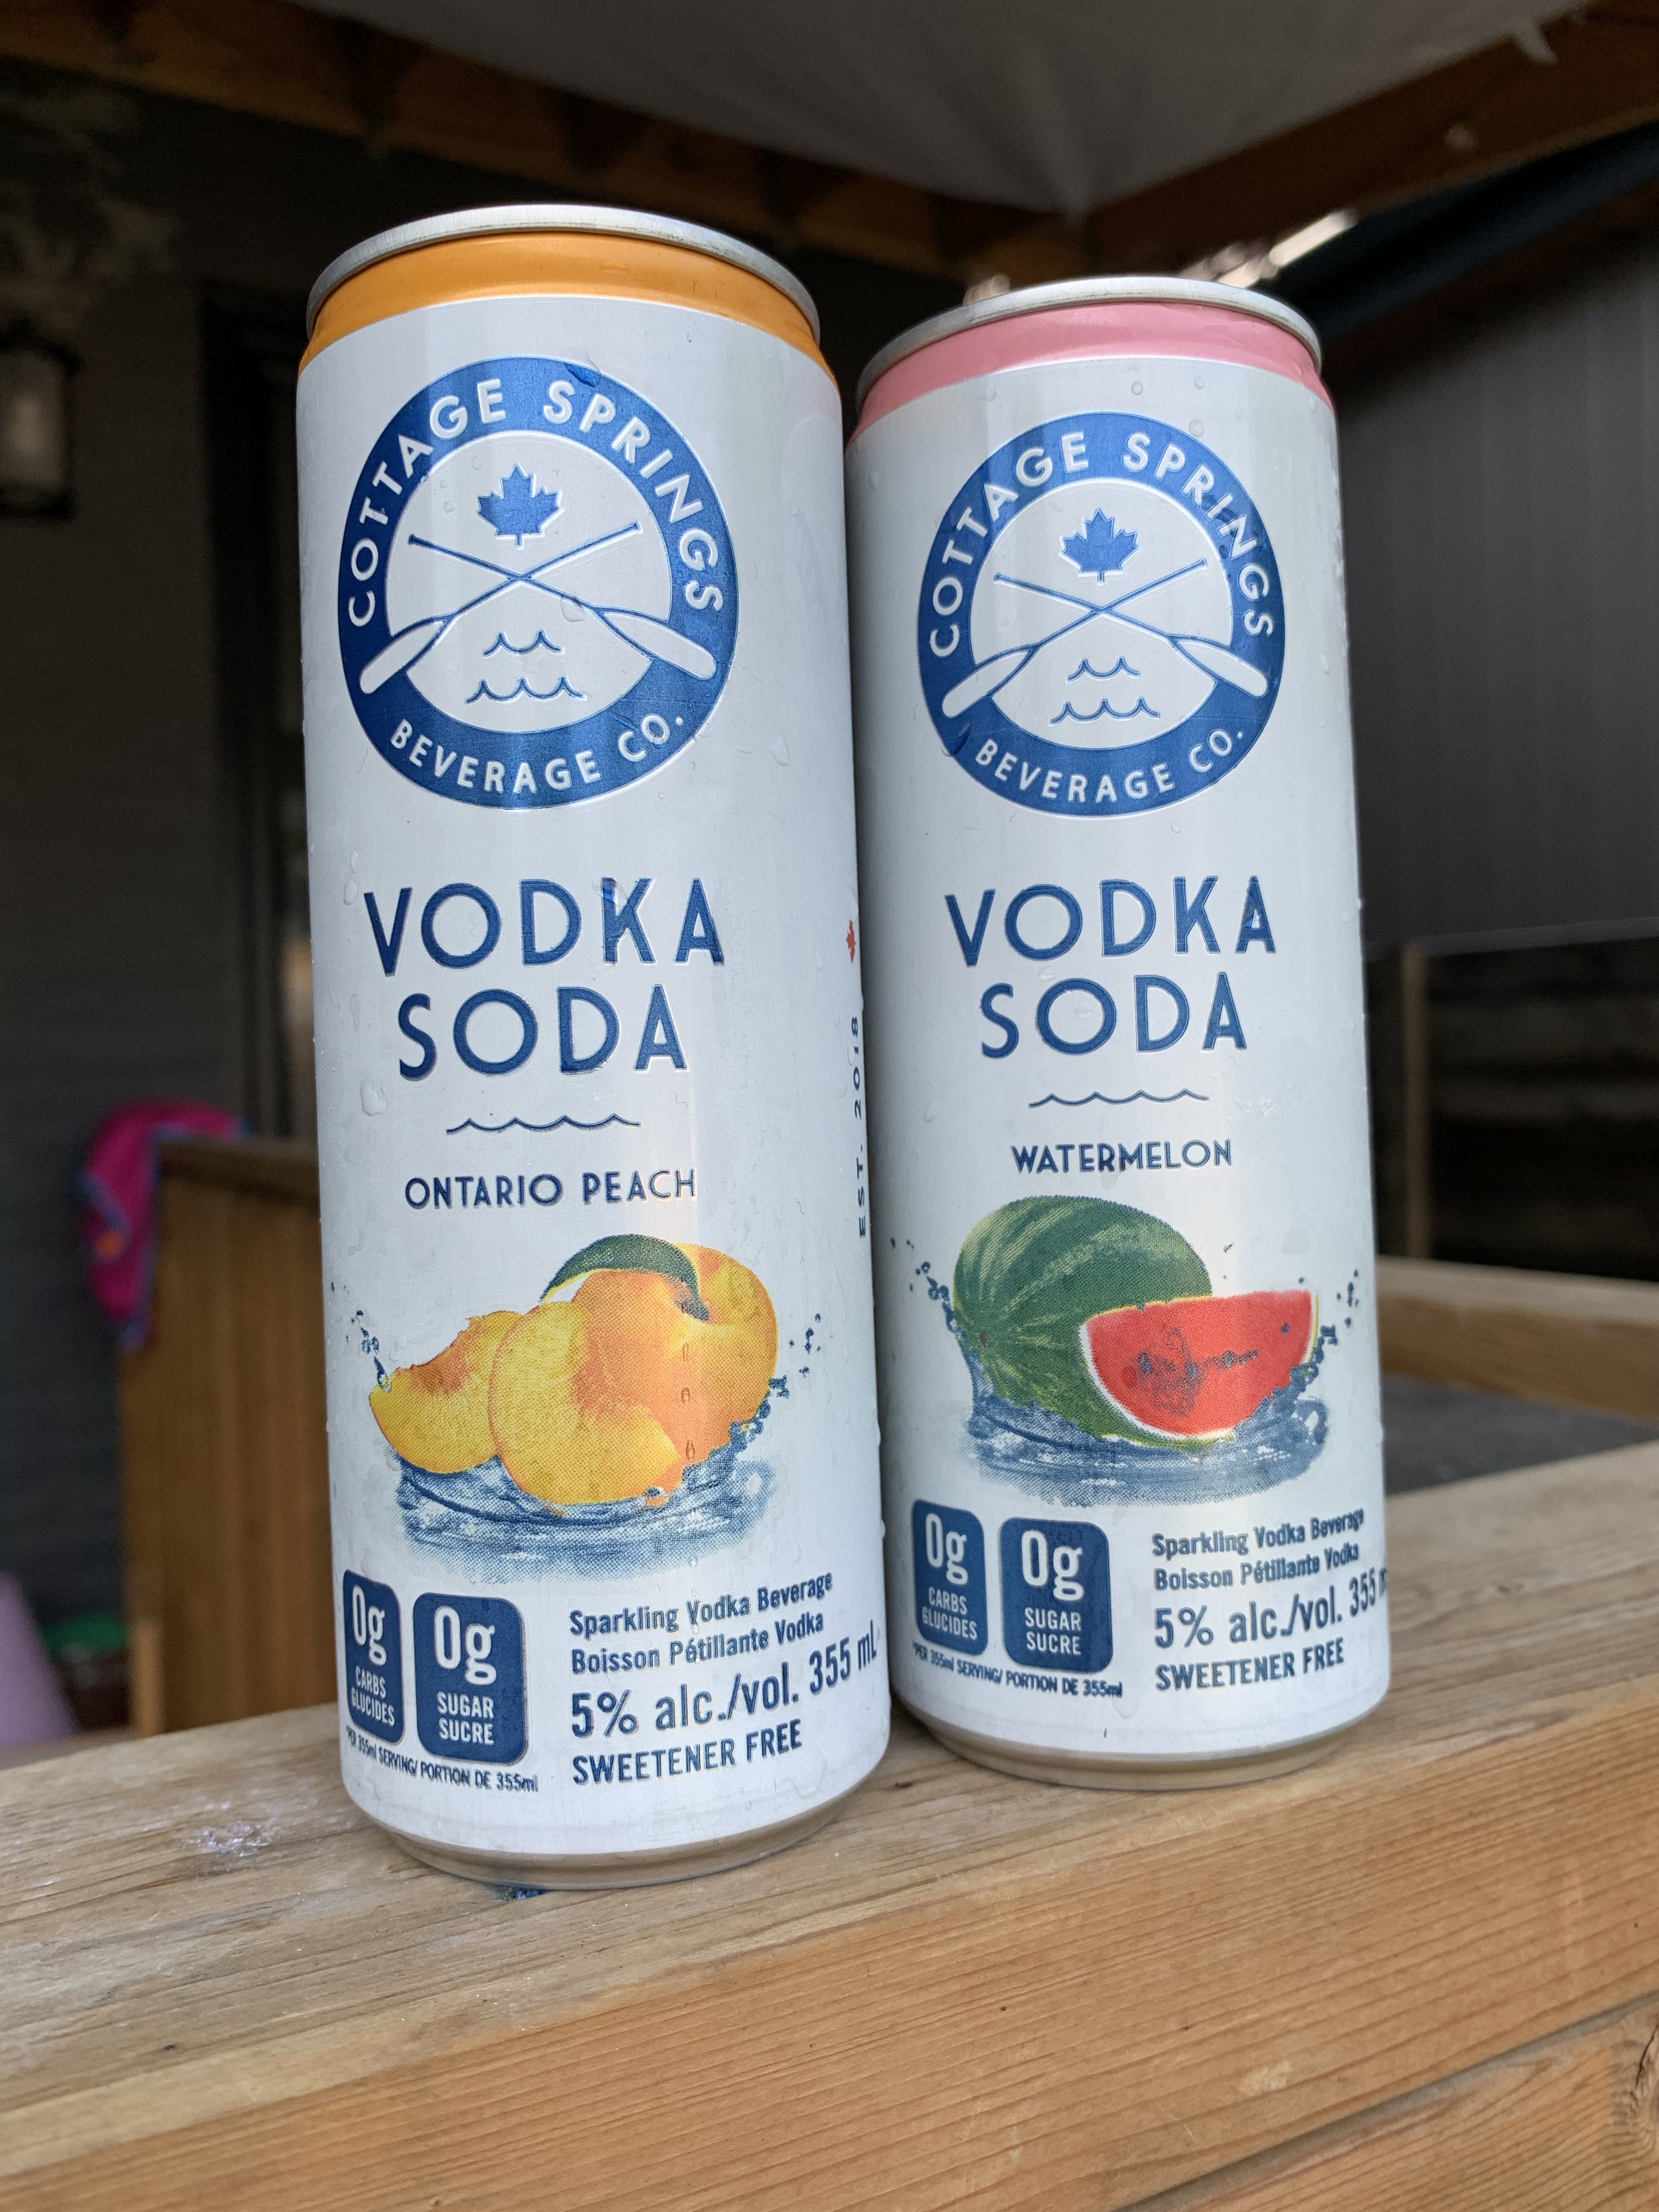 Two cans of vodka soda from Cottage Springs. One is Ontario Peach and one is Watermelon.